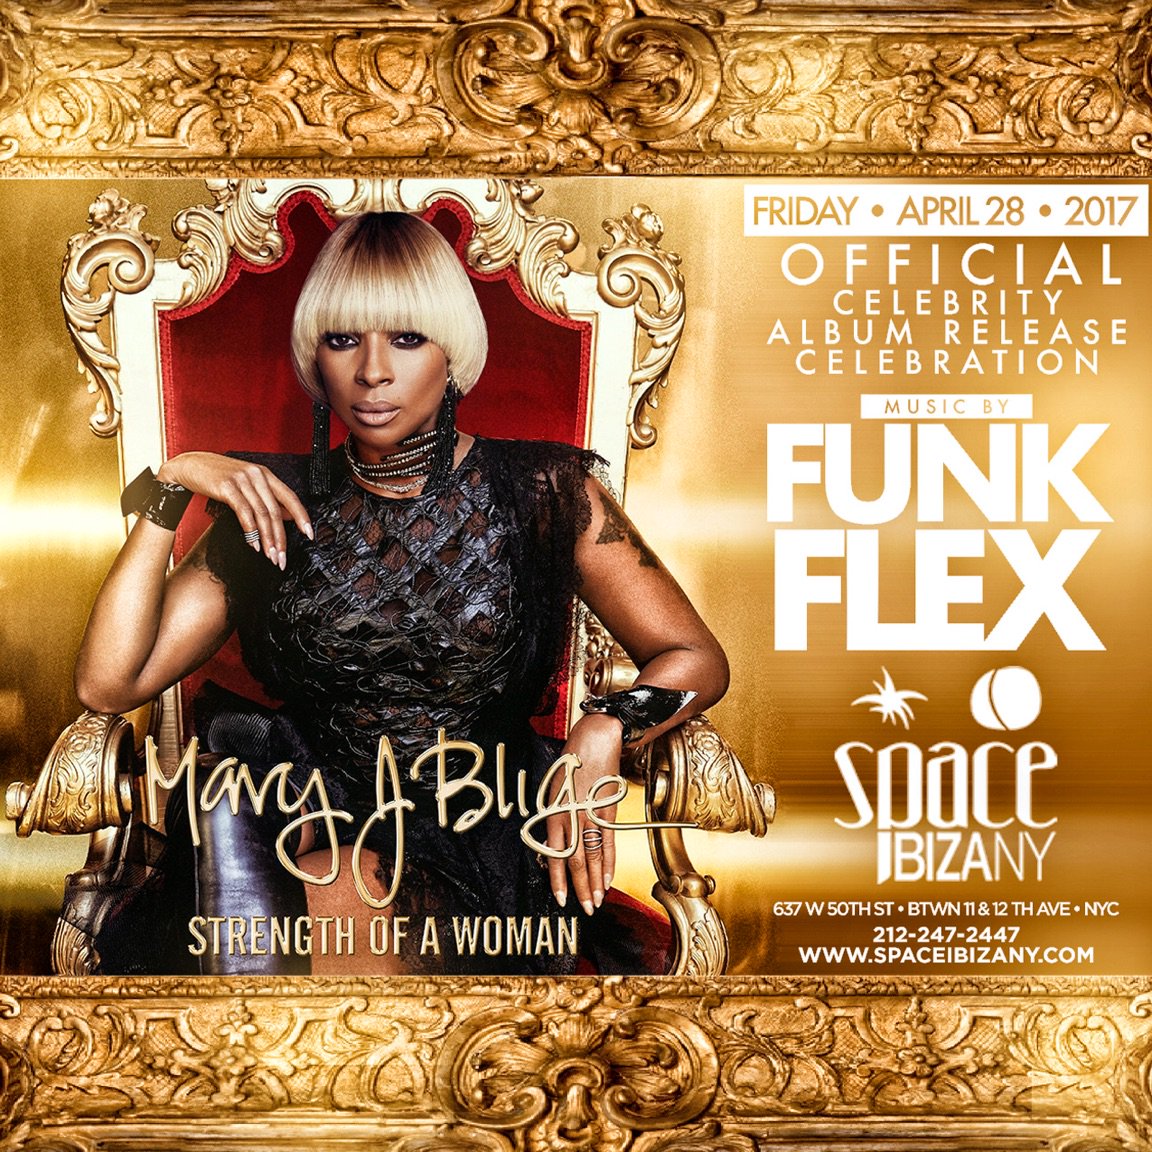 Celebrate #StrengthOfAWoman with me and @funkflex this Friday at @spaceibizany ???? https://t.co/Rk78oA7xdE